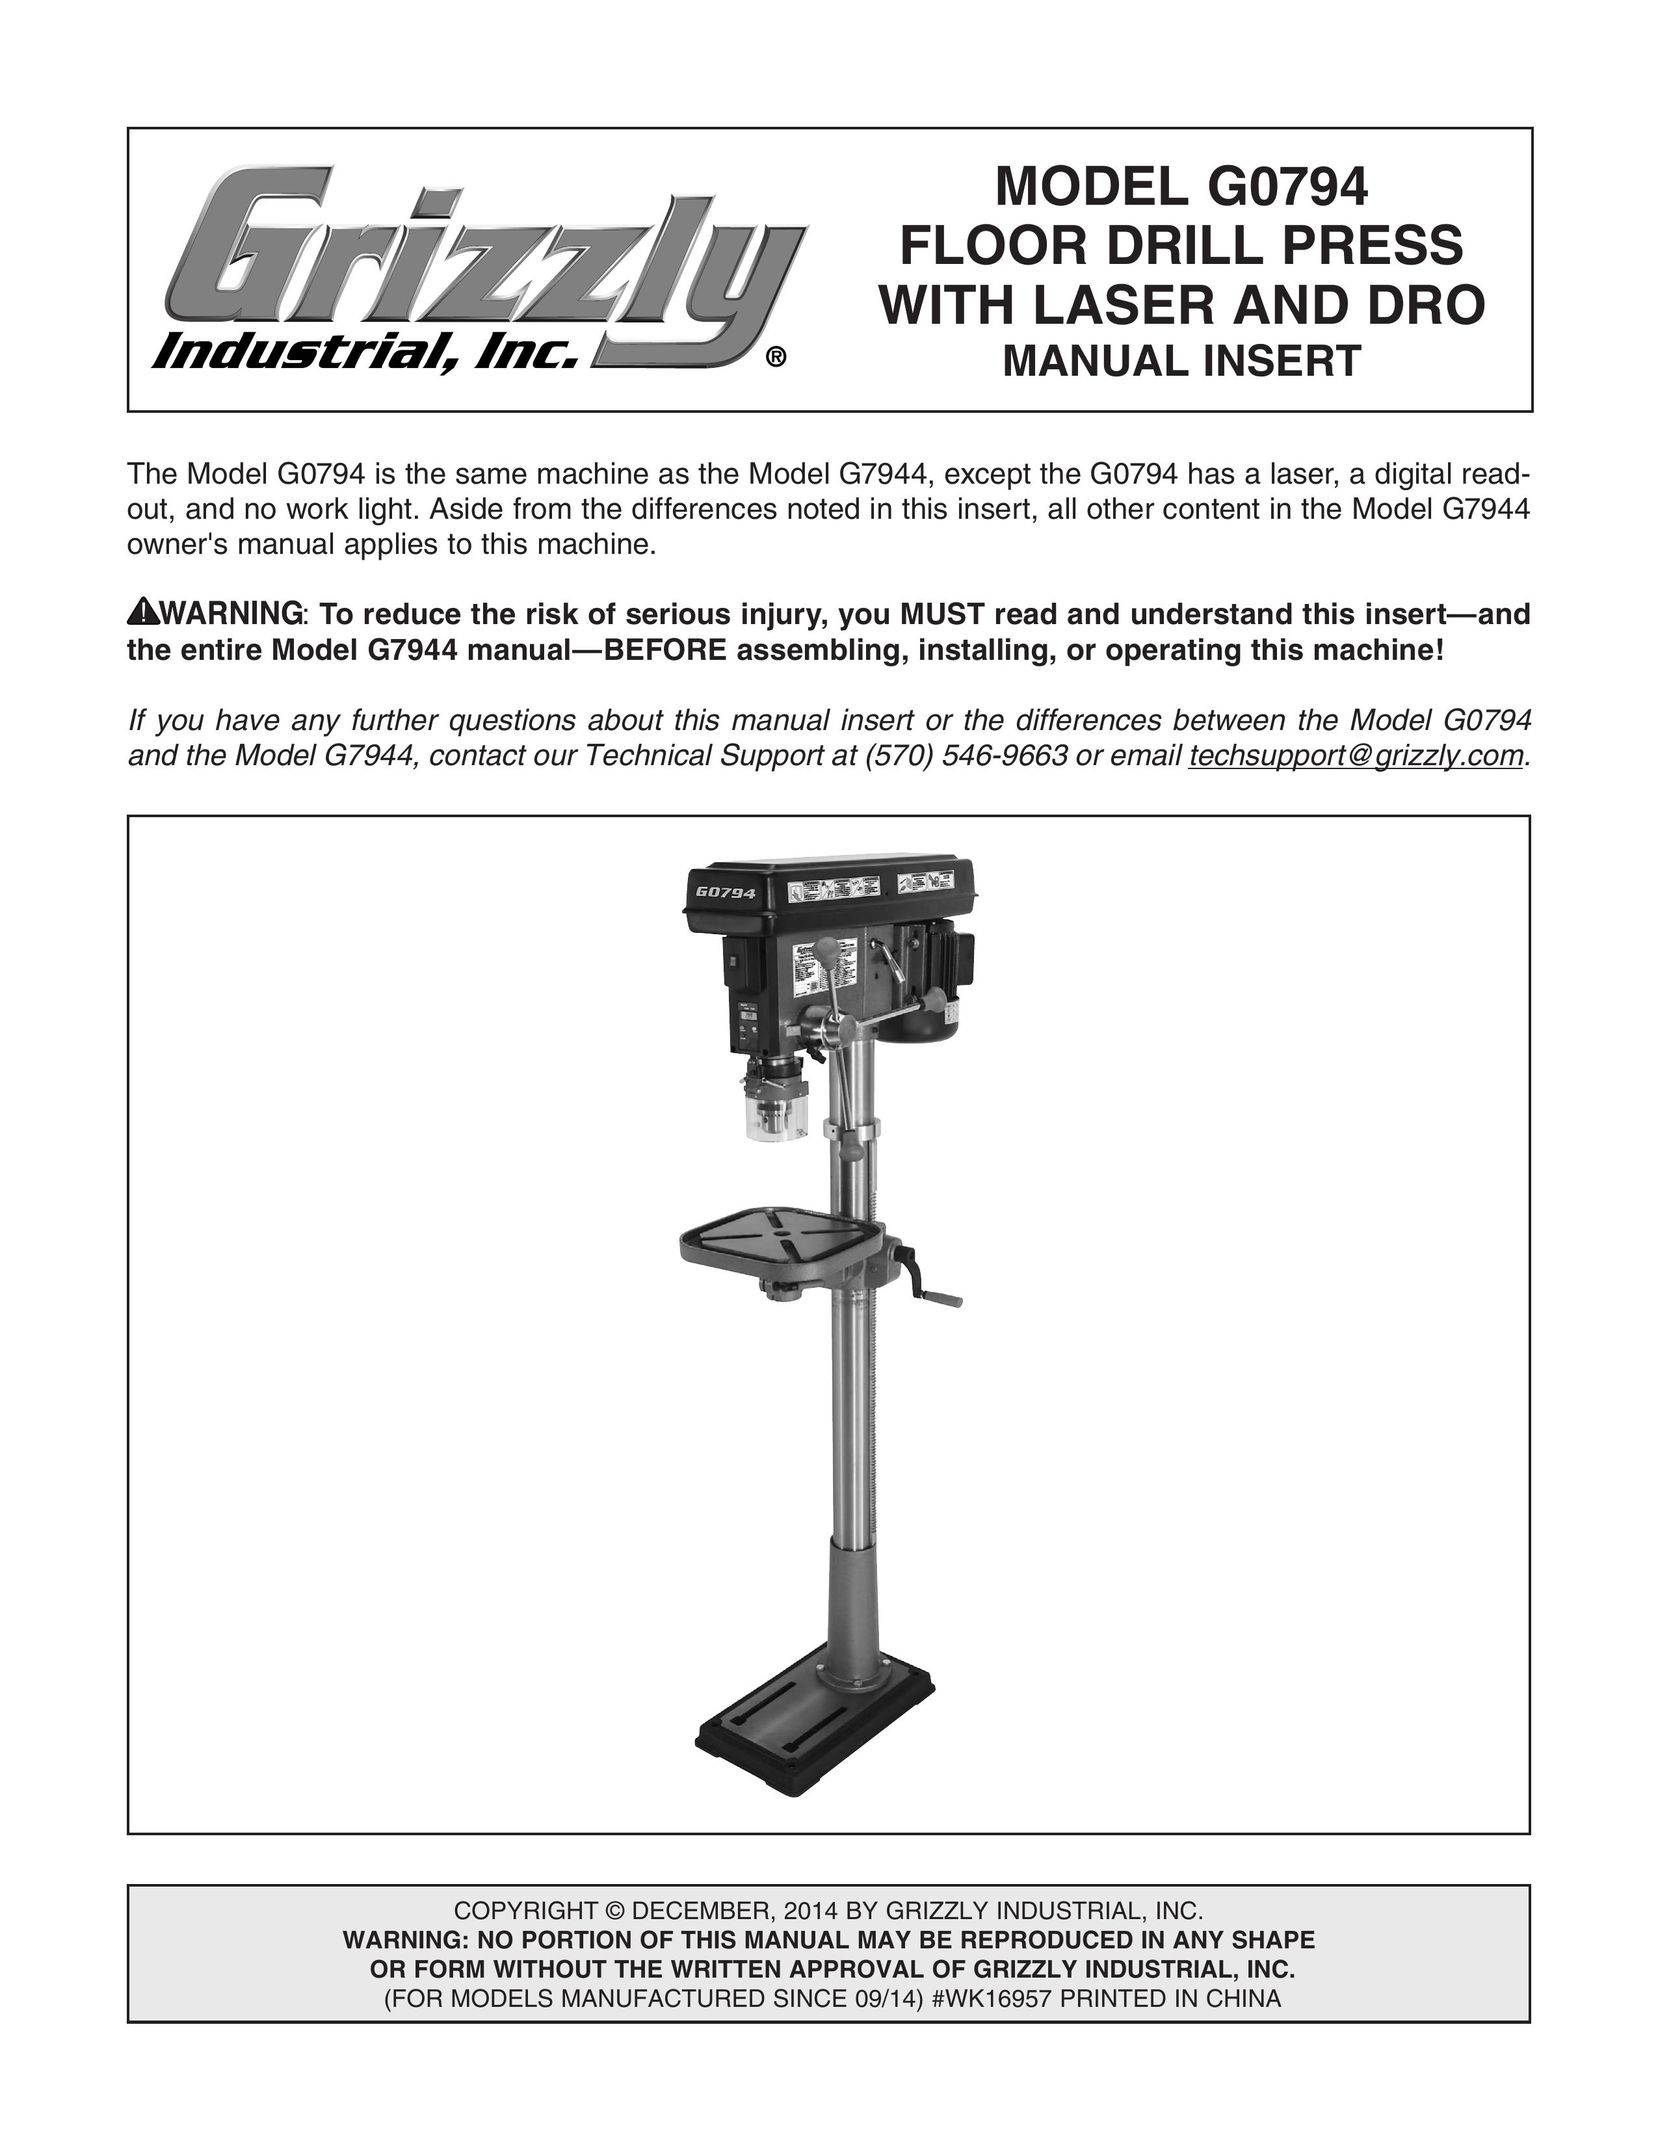 Grizzly G0794 Drill User Manual